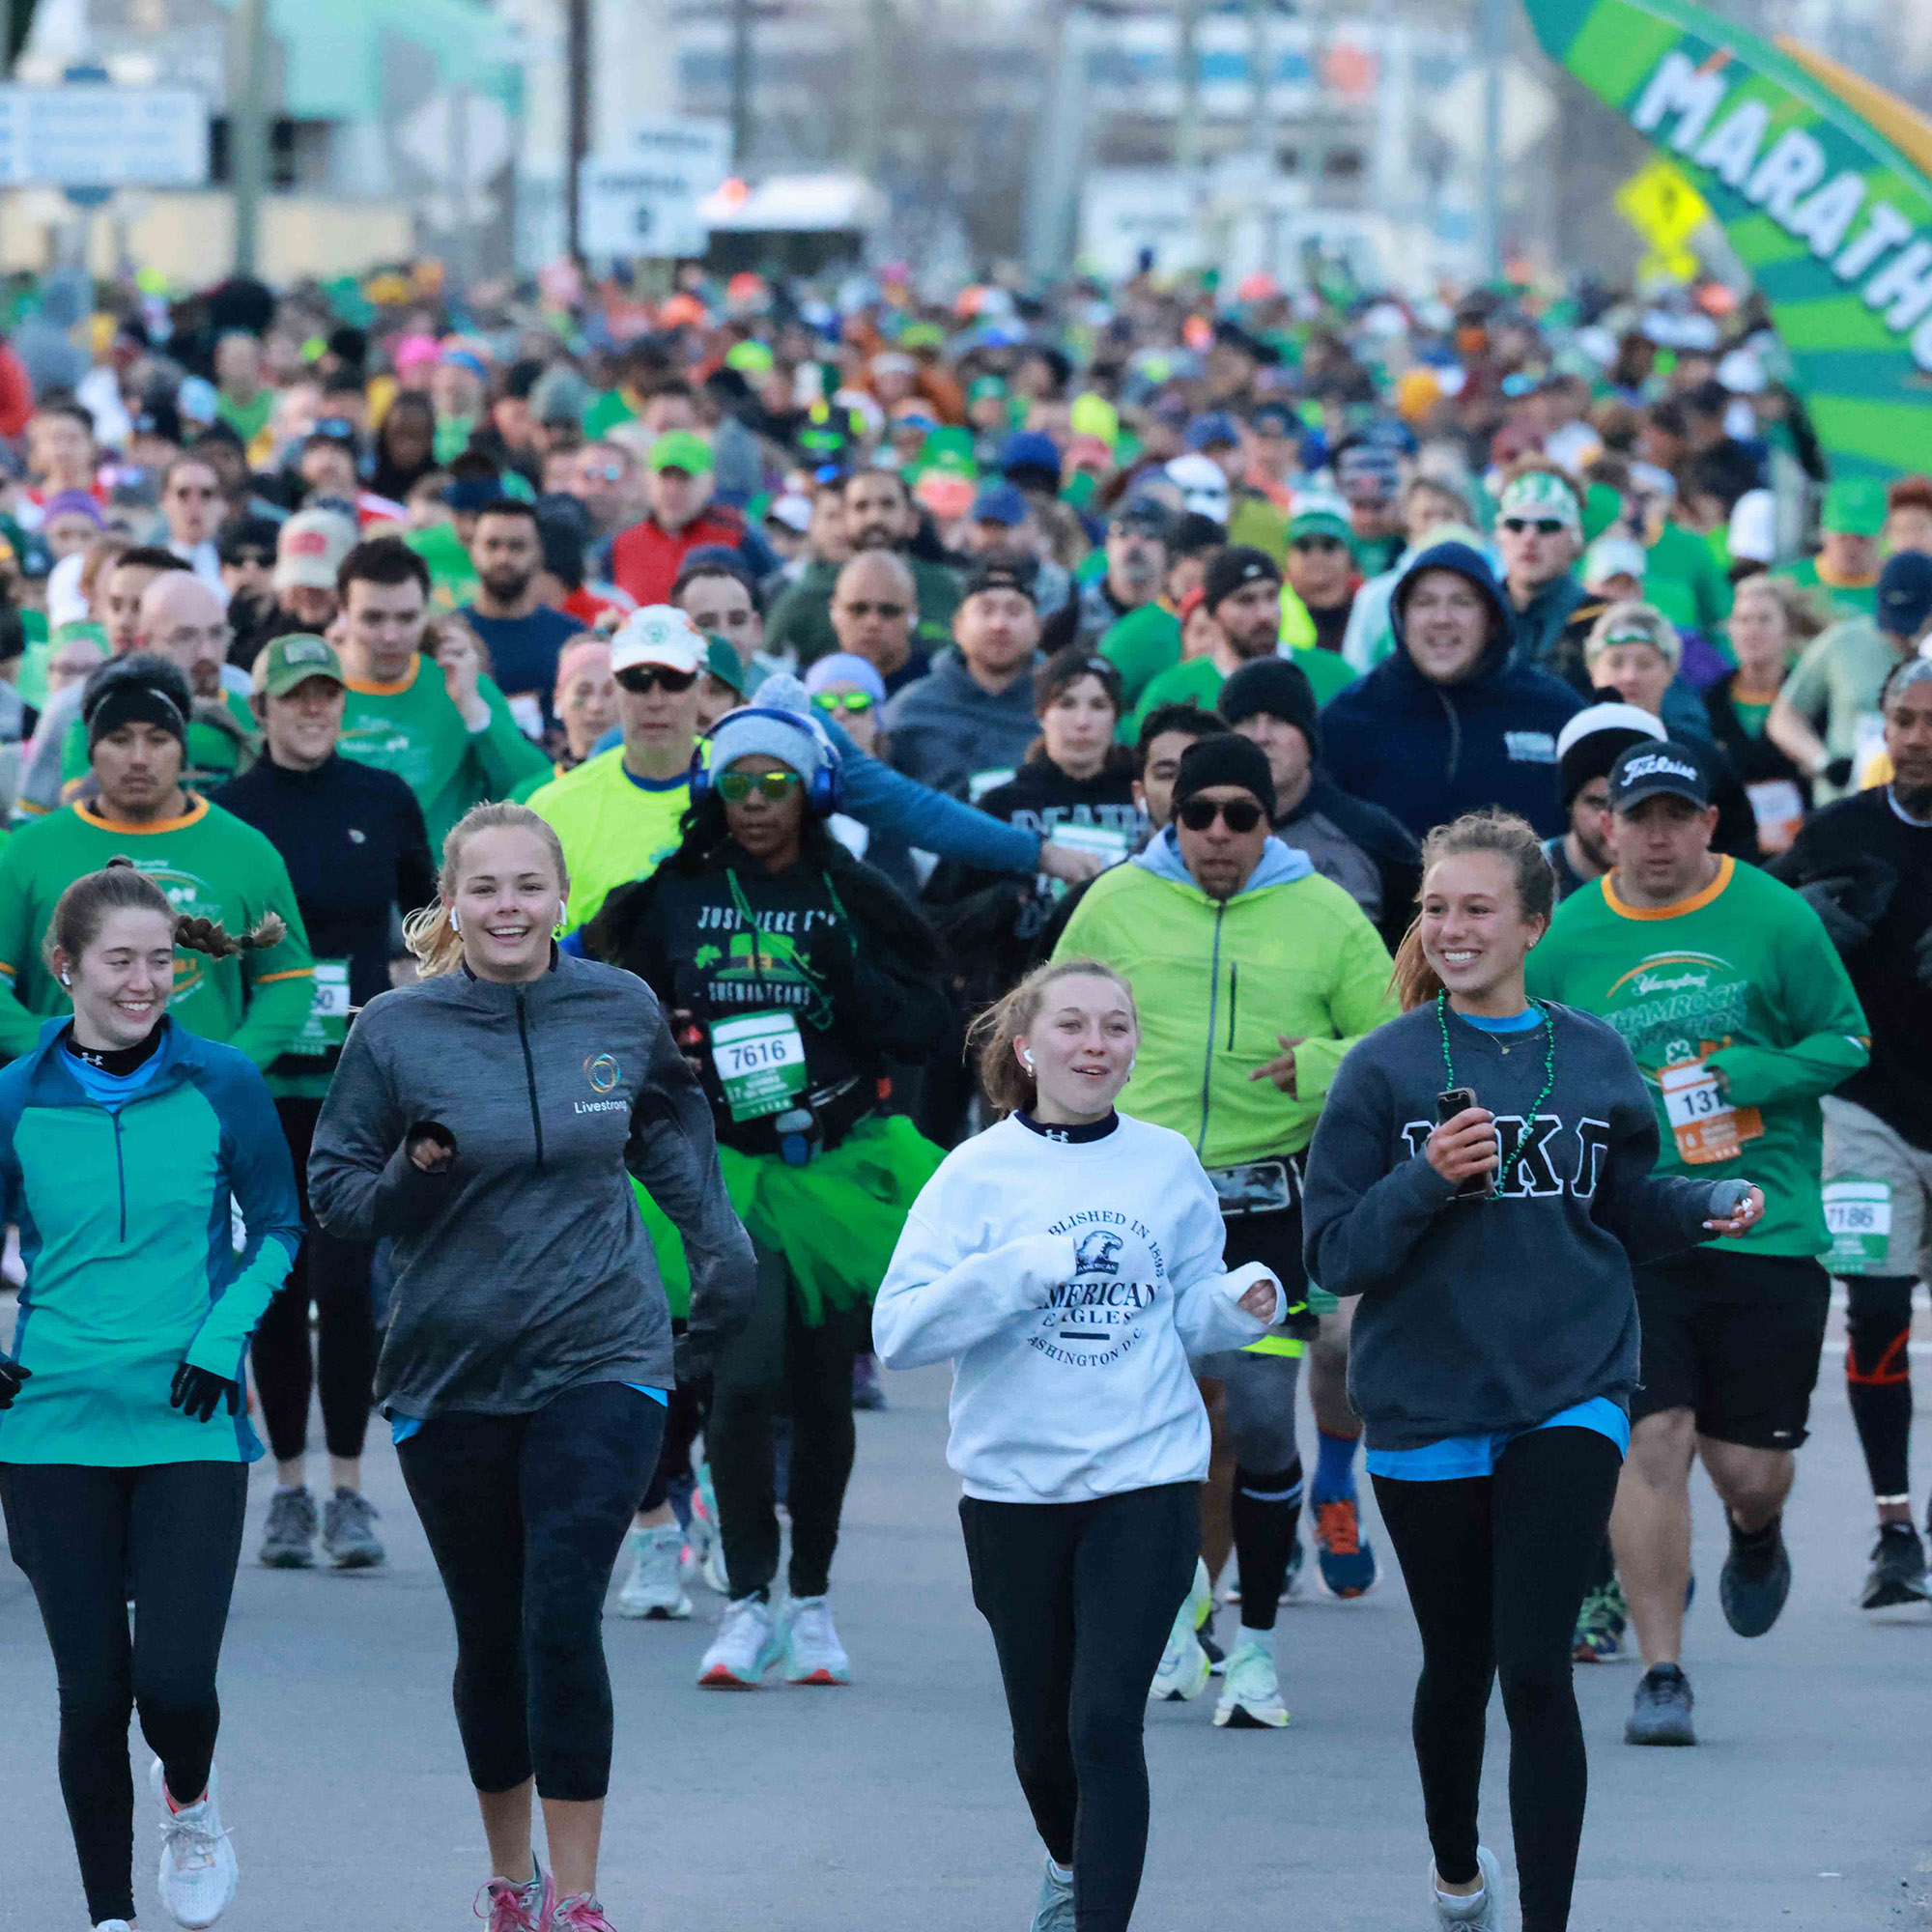 20,000 Shamrock Participants Took to the Streets at the Virginia Beach